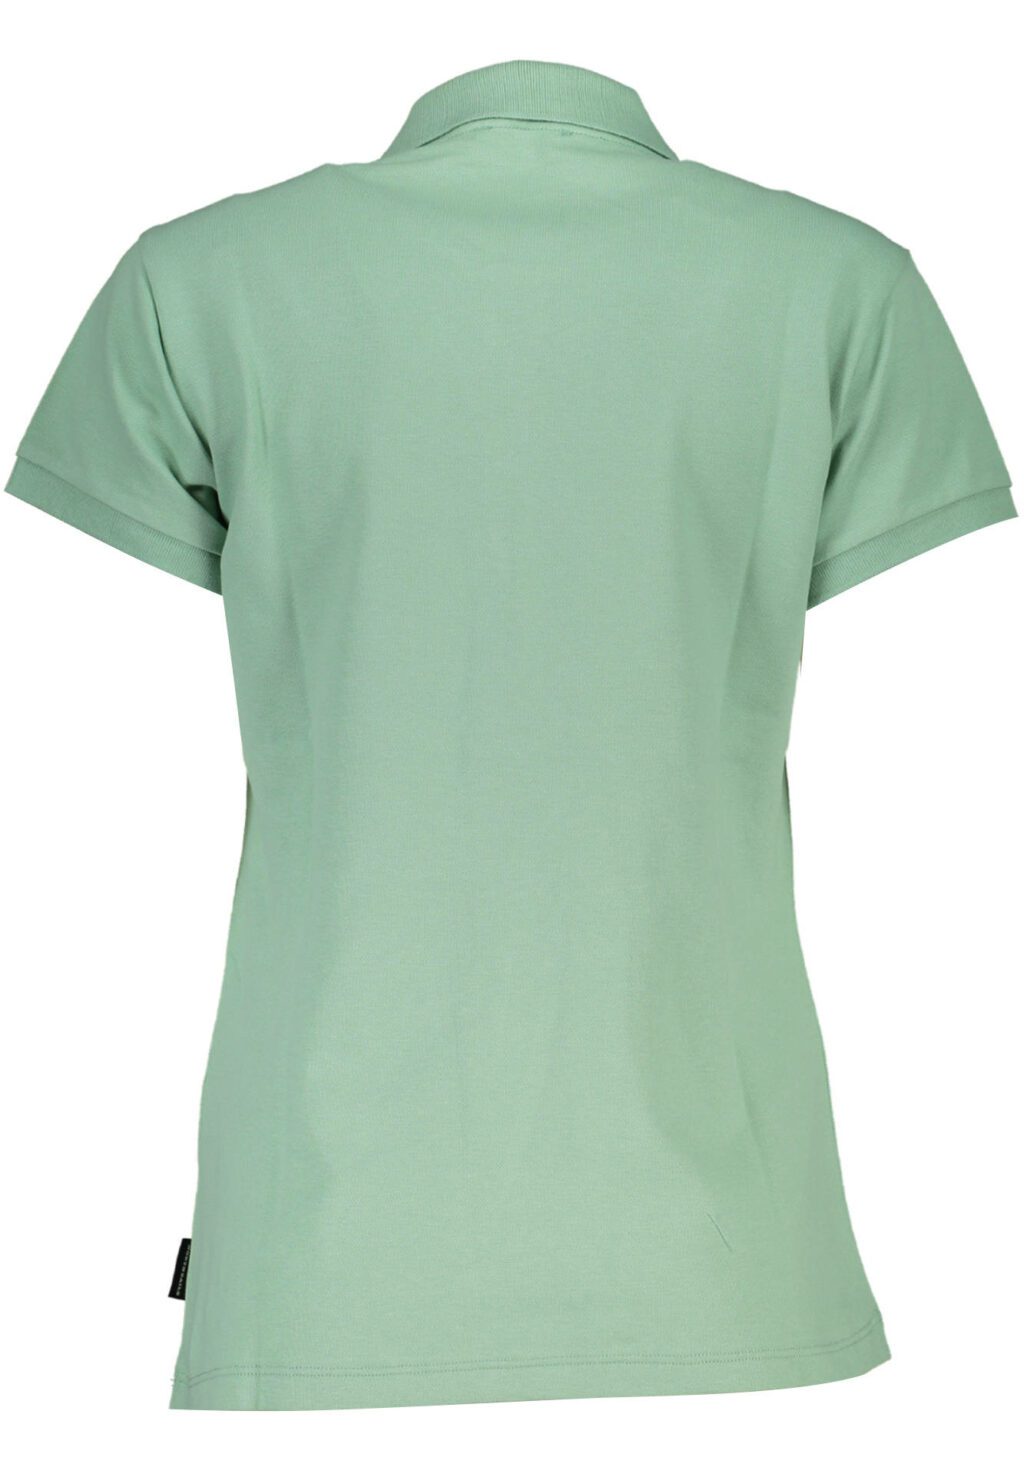 NORTH SAILS POLO SHORT SLEEVE WOMAN GREEN 094164-000_VERDE_0405